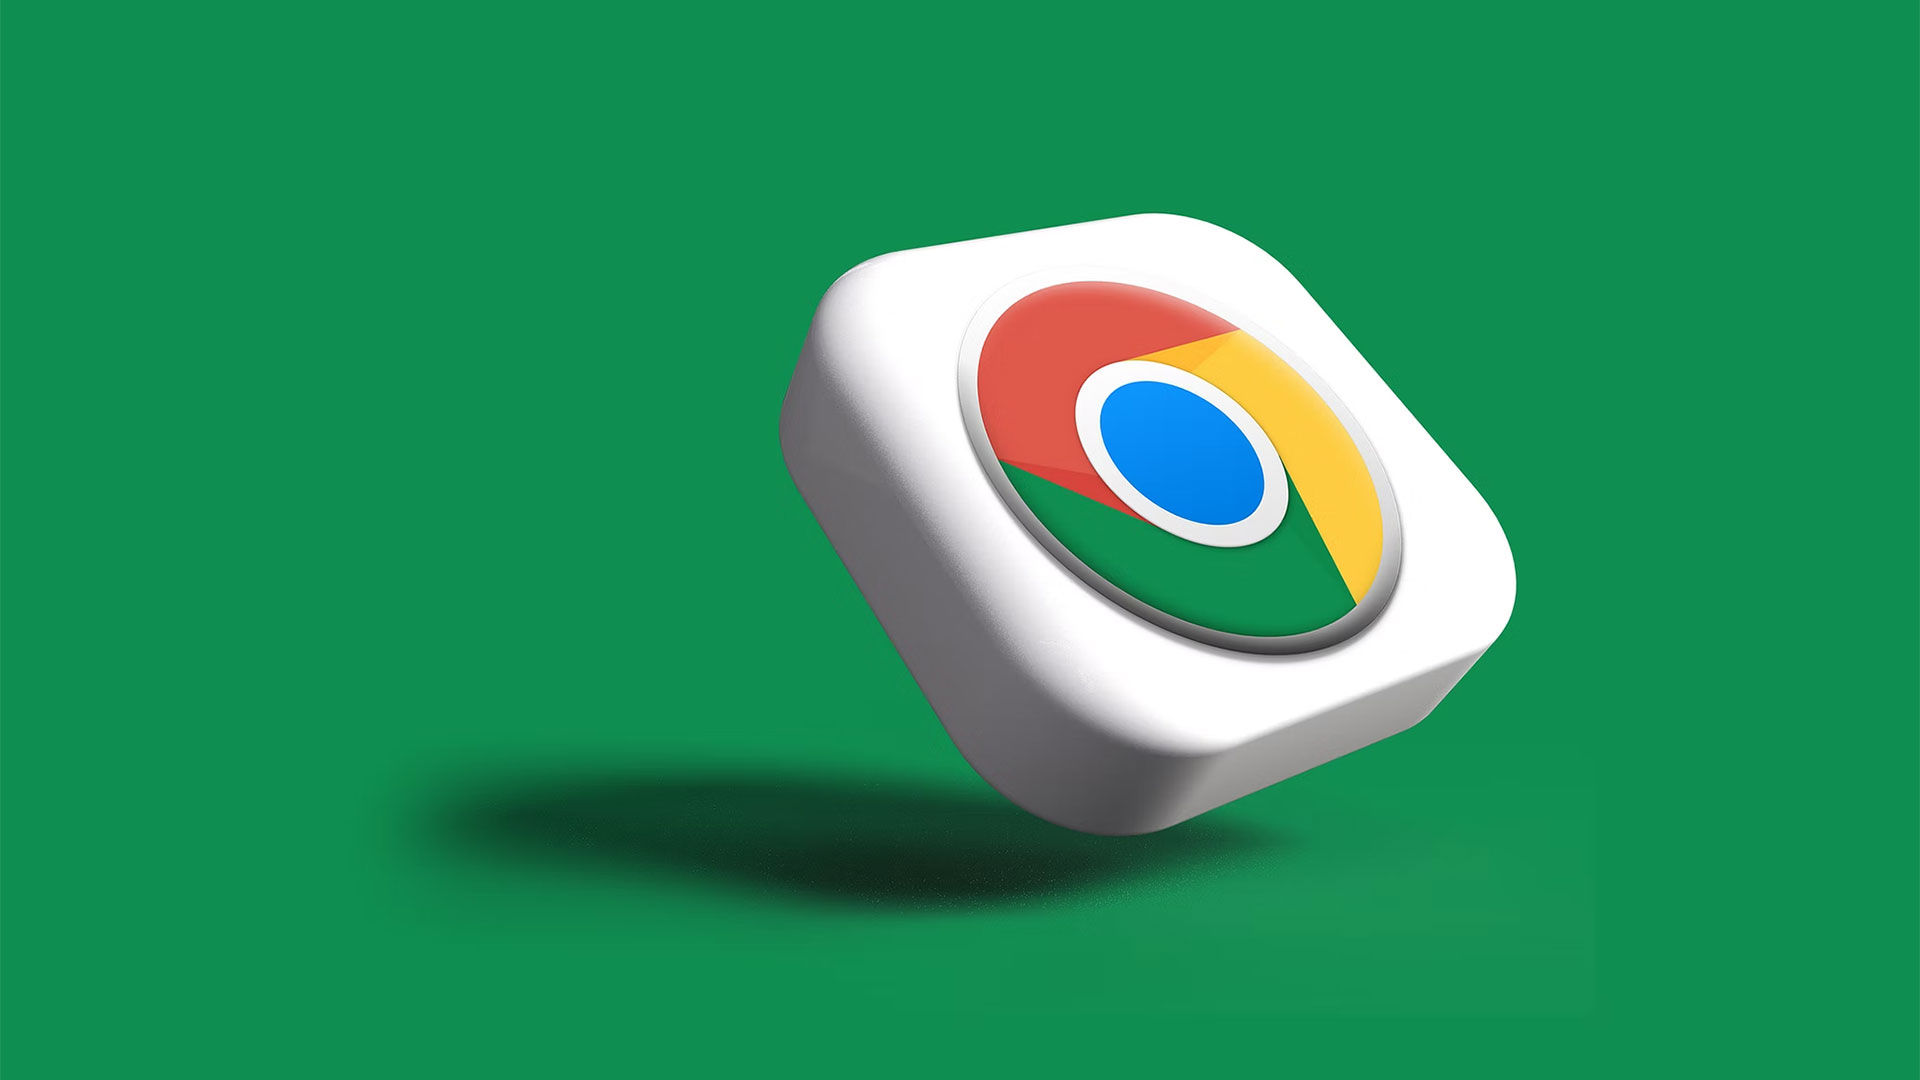 How to Stop Google Chrome from Automatically Updating